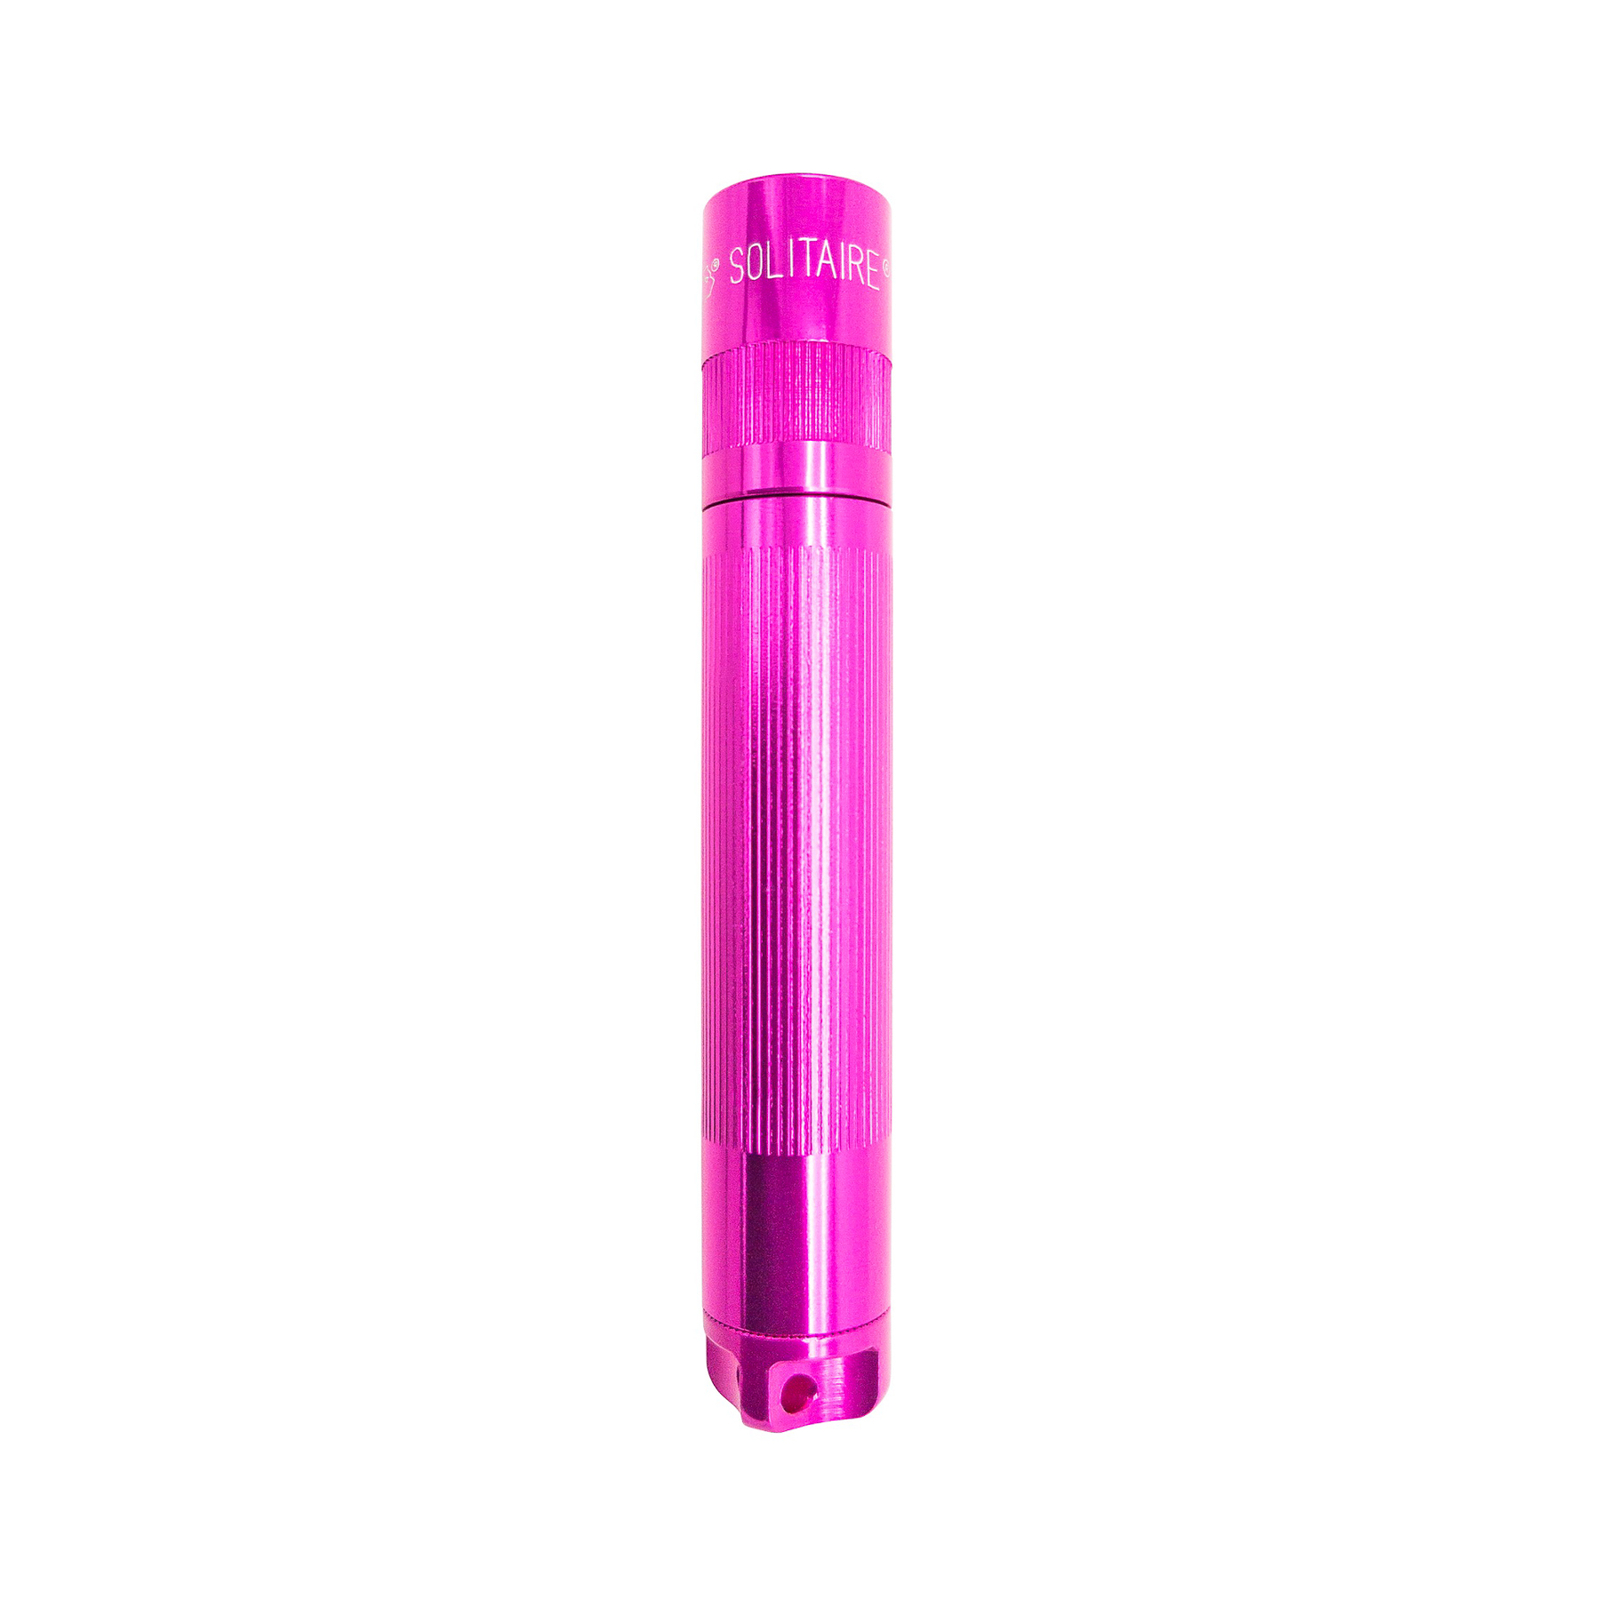 Maglite lampe de poche LED Solitaire, 1-Cell AAA, Boxer, ROSA